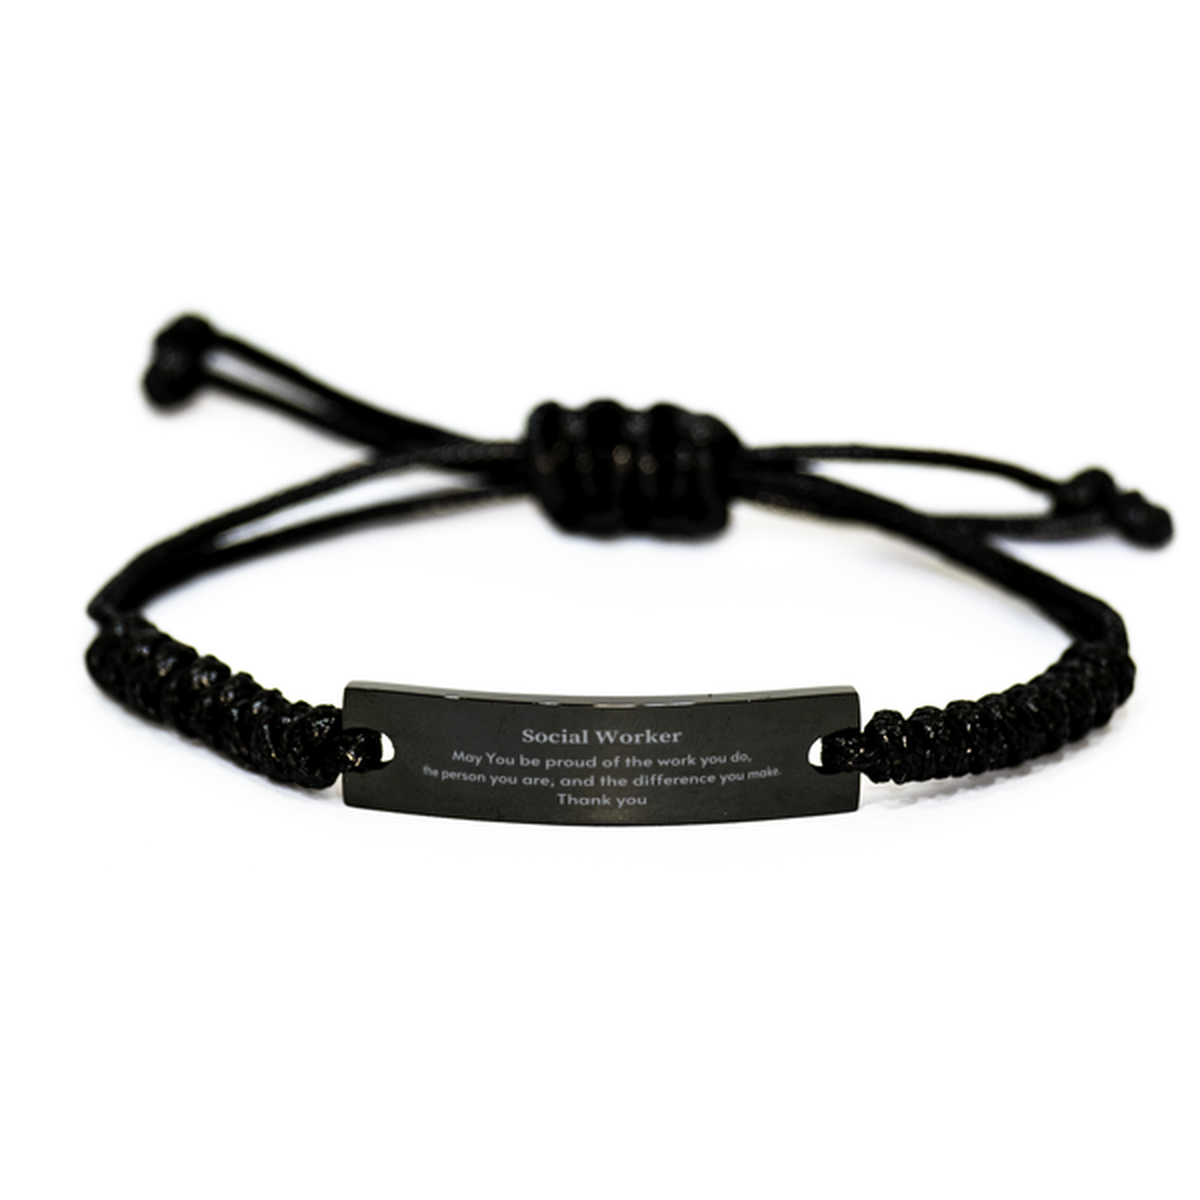 Heartwarming Black Rope Bracelet Retirement Coworkers Gifts for Social Worker, Social Worker May You be proud of the work you do, the person you are Gifts for Boss Men Women Friends